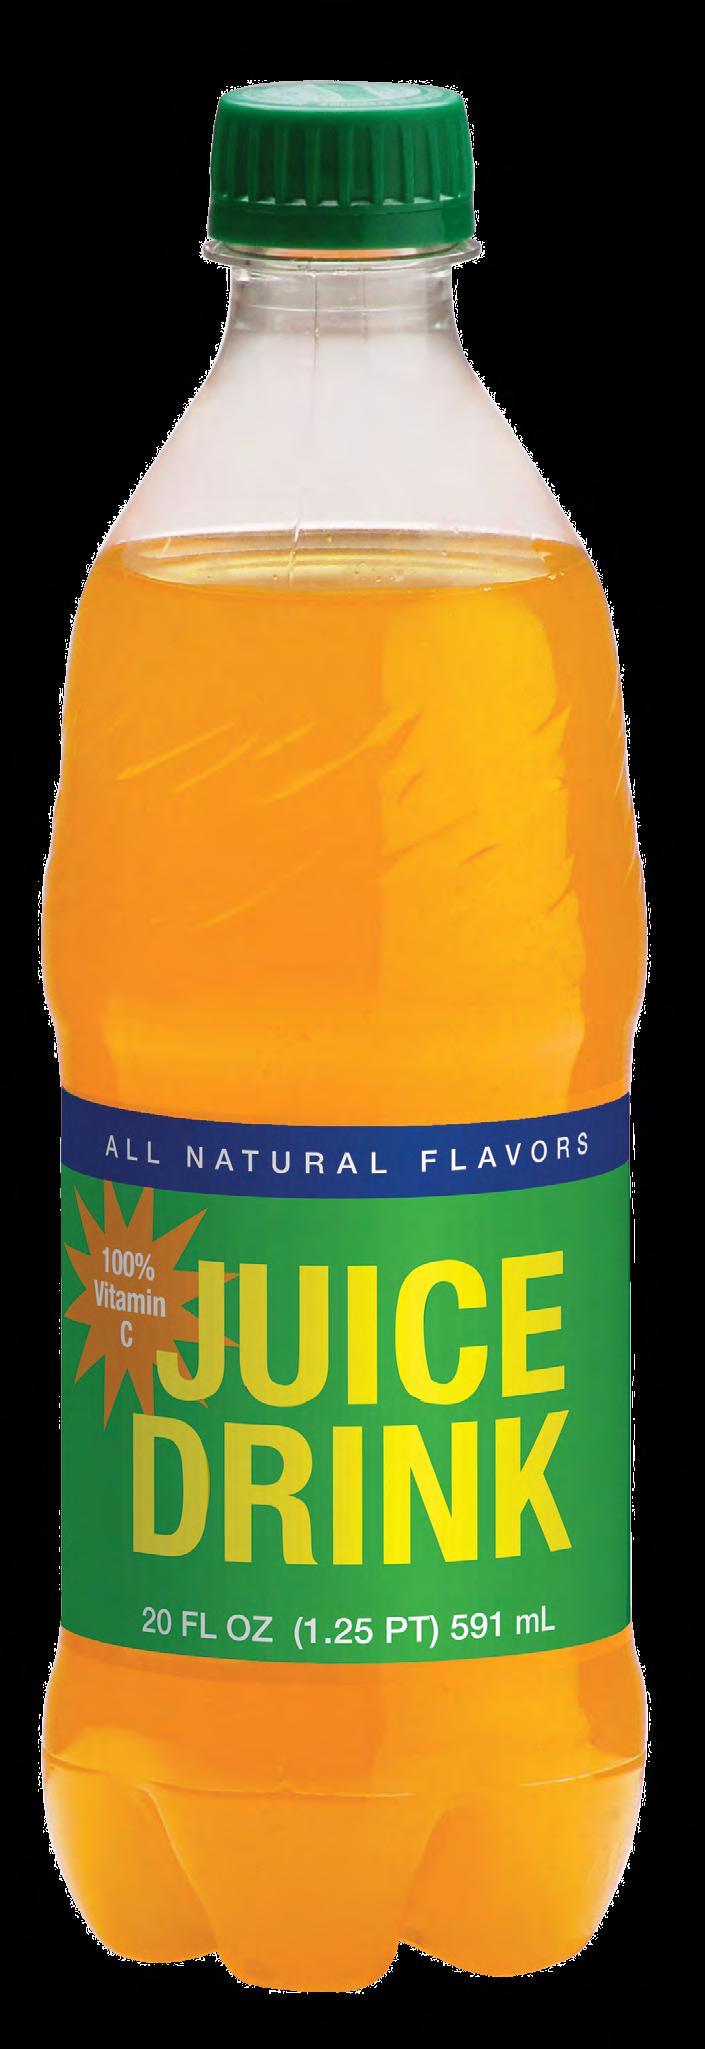 Juice Drink Servings Per Container 2.5 Calories 122 Calories from Fat 0 Sodium 25mg 1% Total Carbohydrate 27g 9% Sugars 27g Vitamin A 0% Vitamin C 100% Calcium 0% Iron 0% Contains 10% juice.